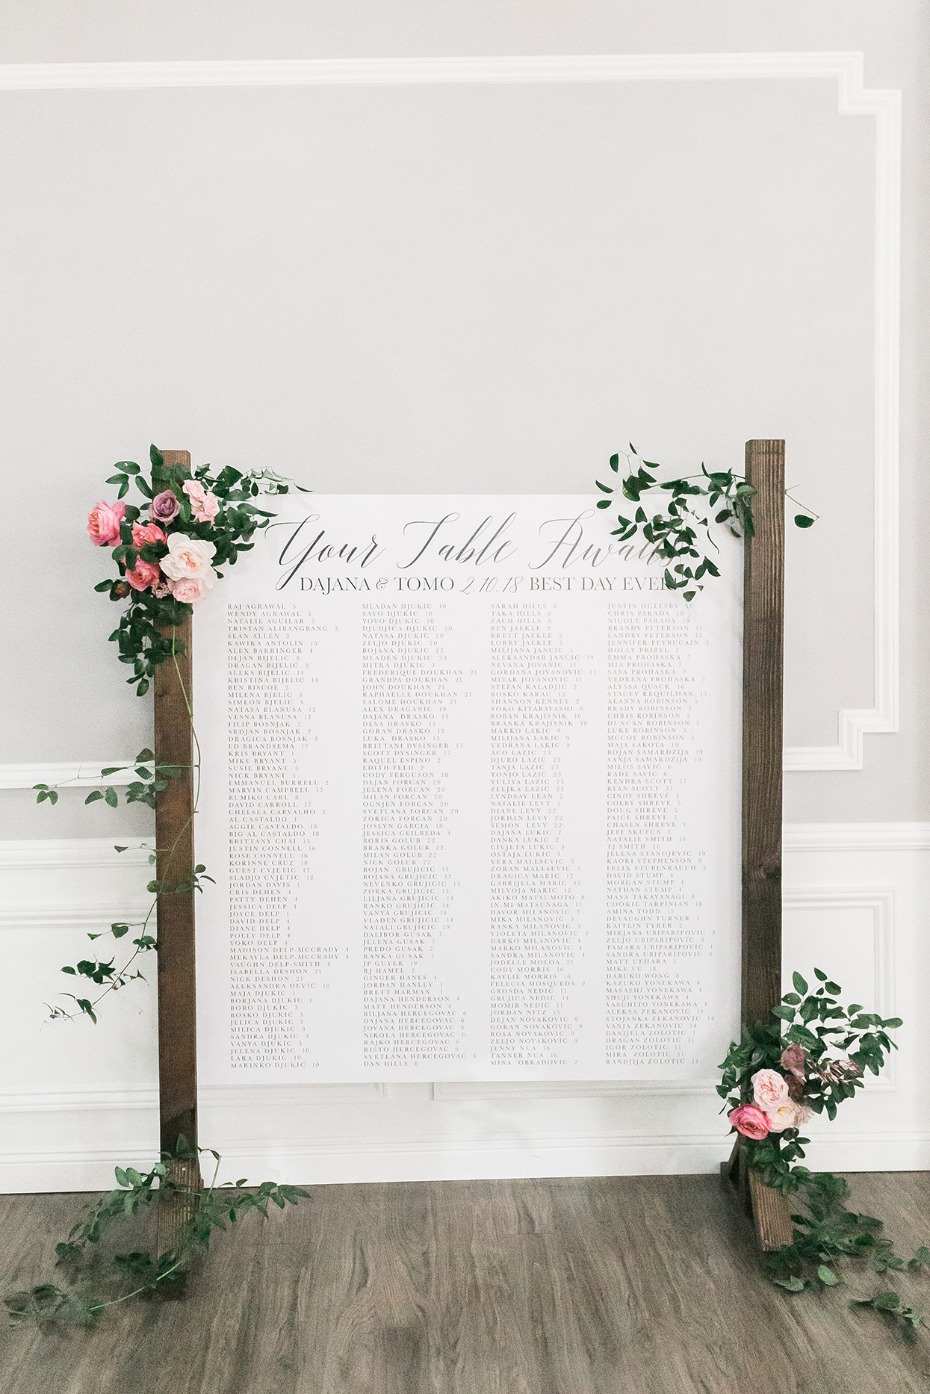 Seating chart for 250 guests